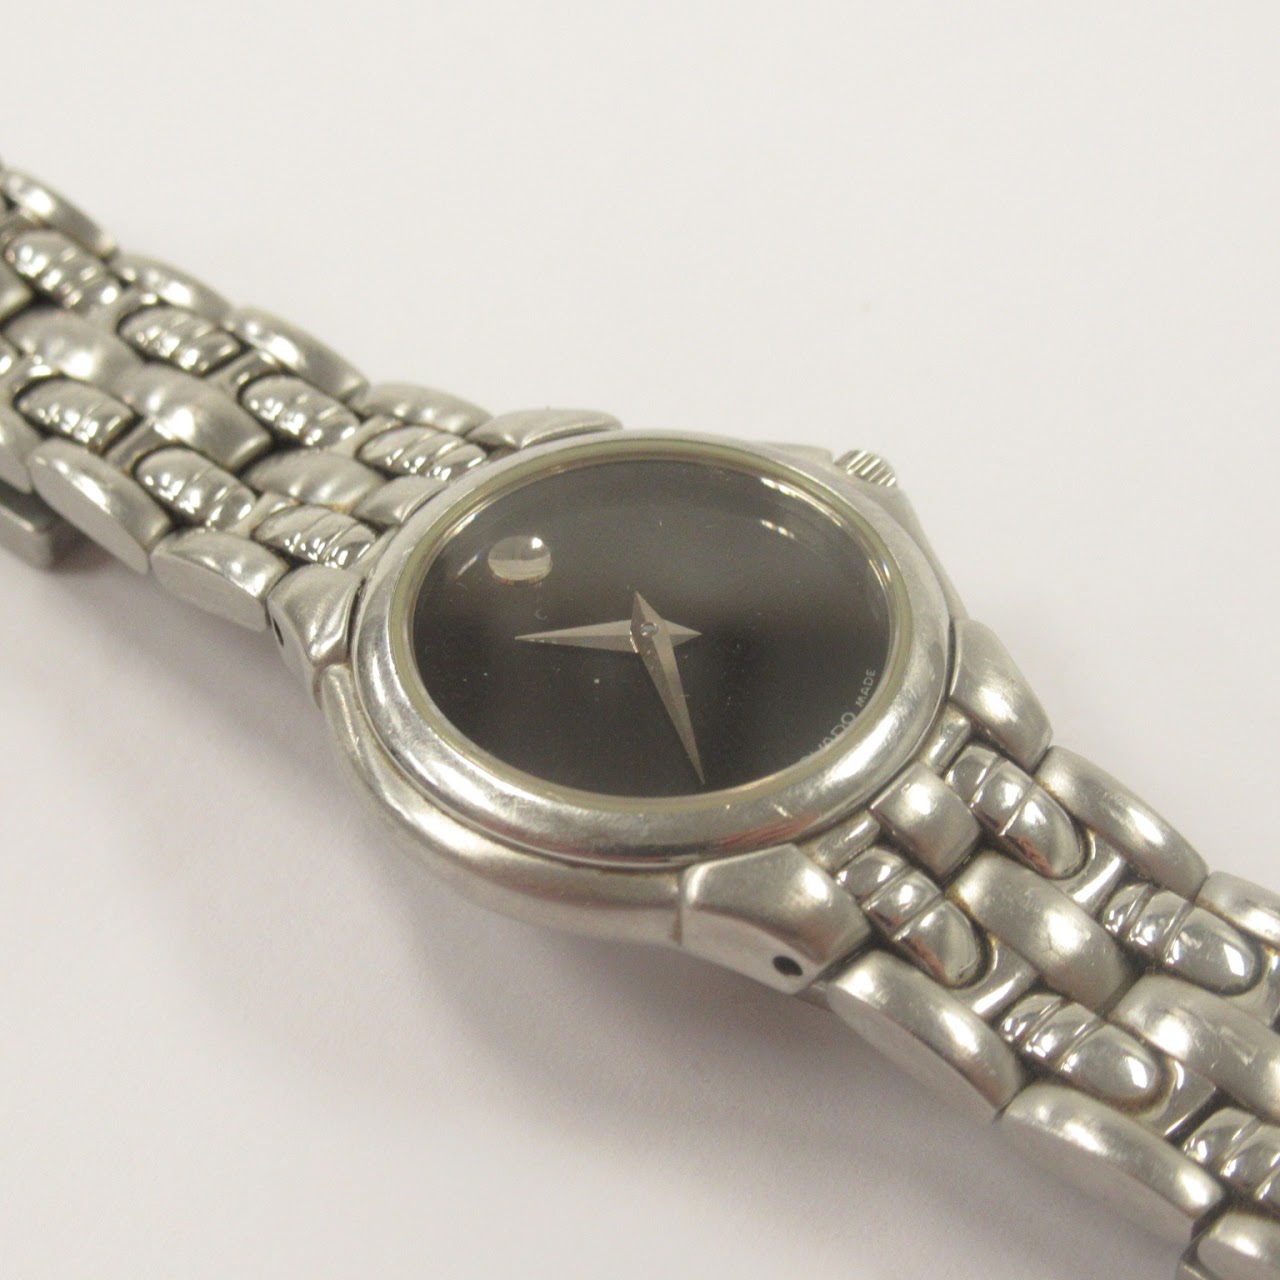 Movado Ladies Museum Dial Watch